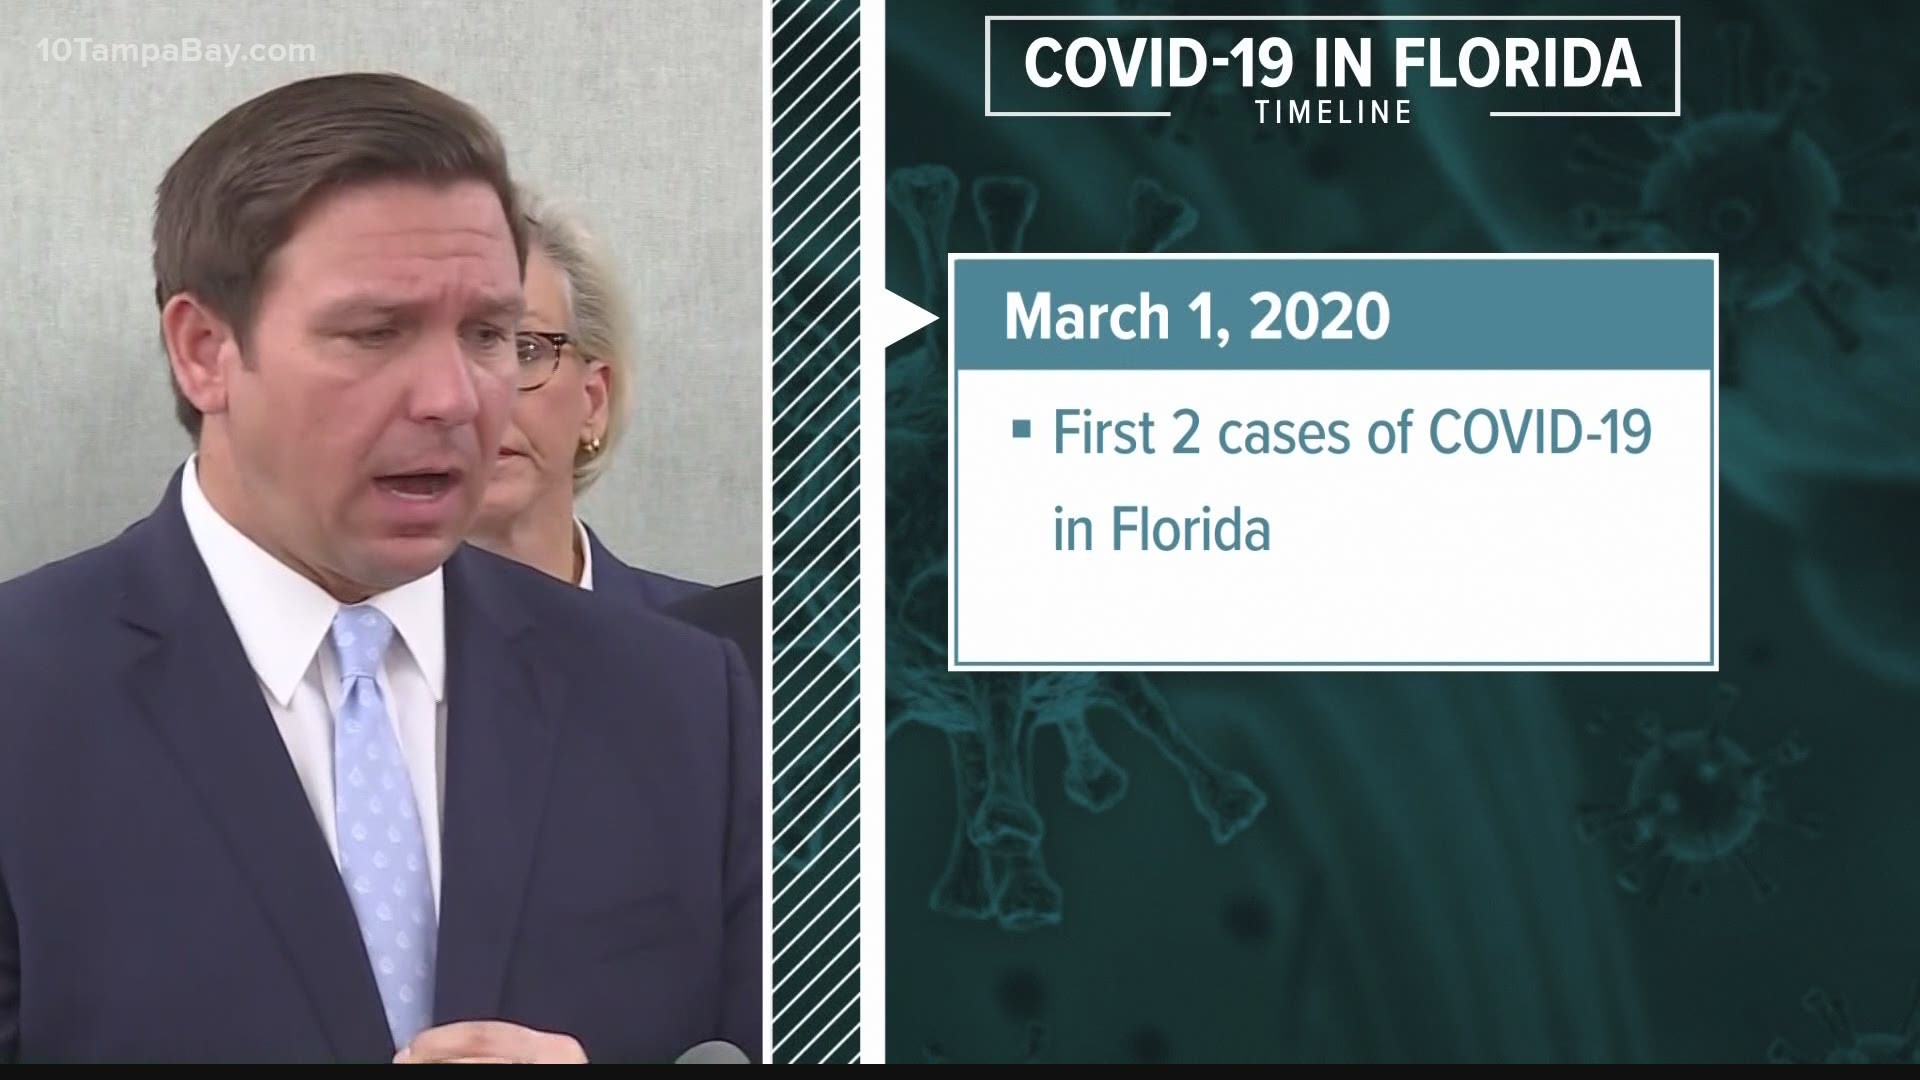 Florida had its first two confirmed cases of COVID-19 one year ago on March 1, 2020.